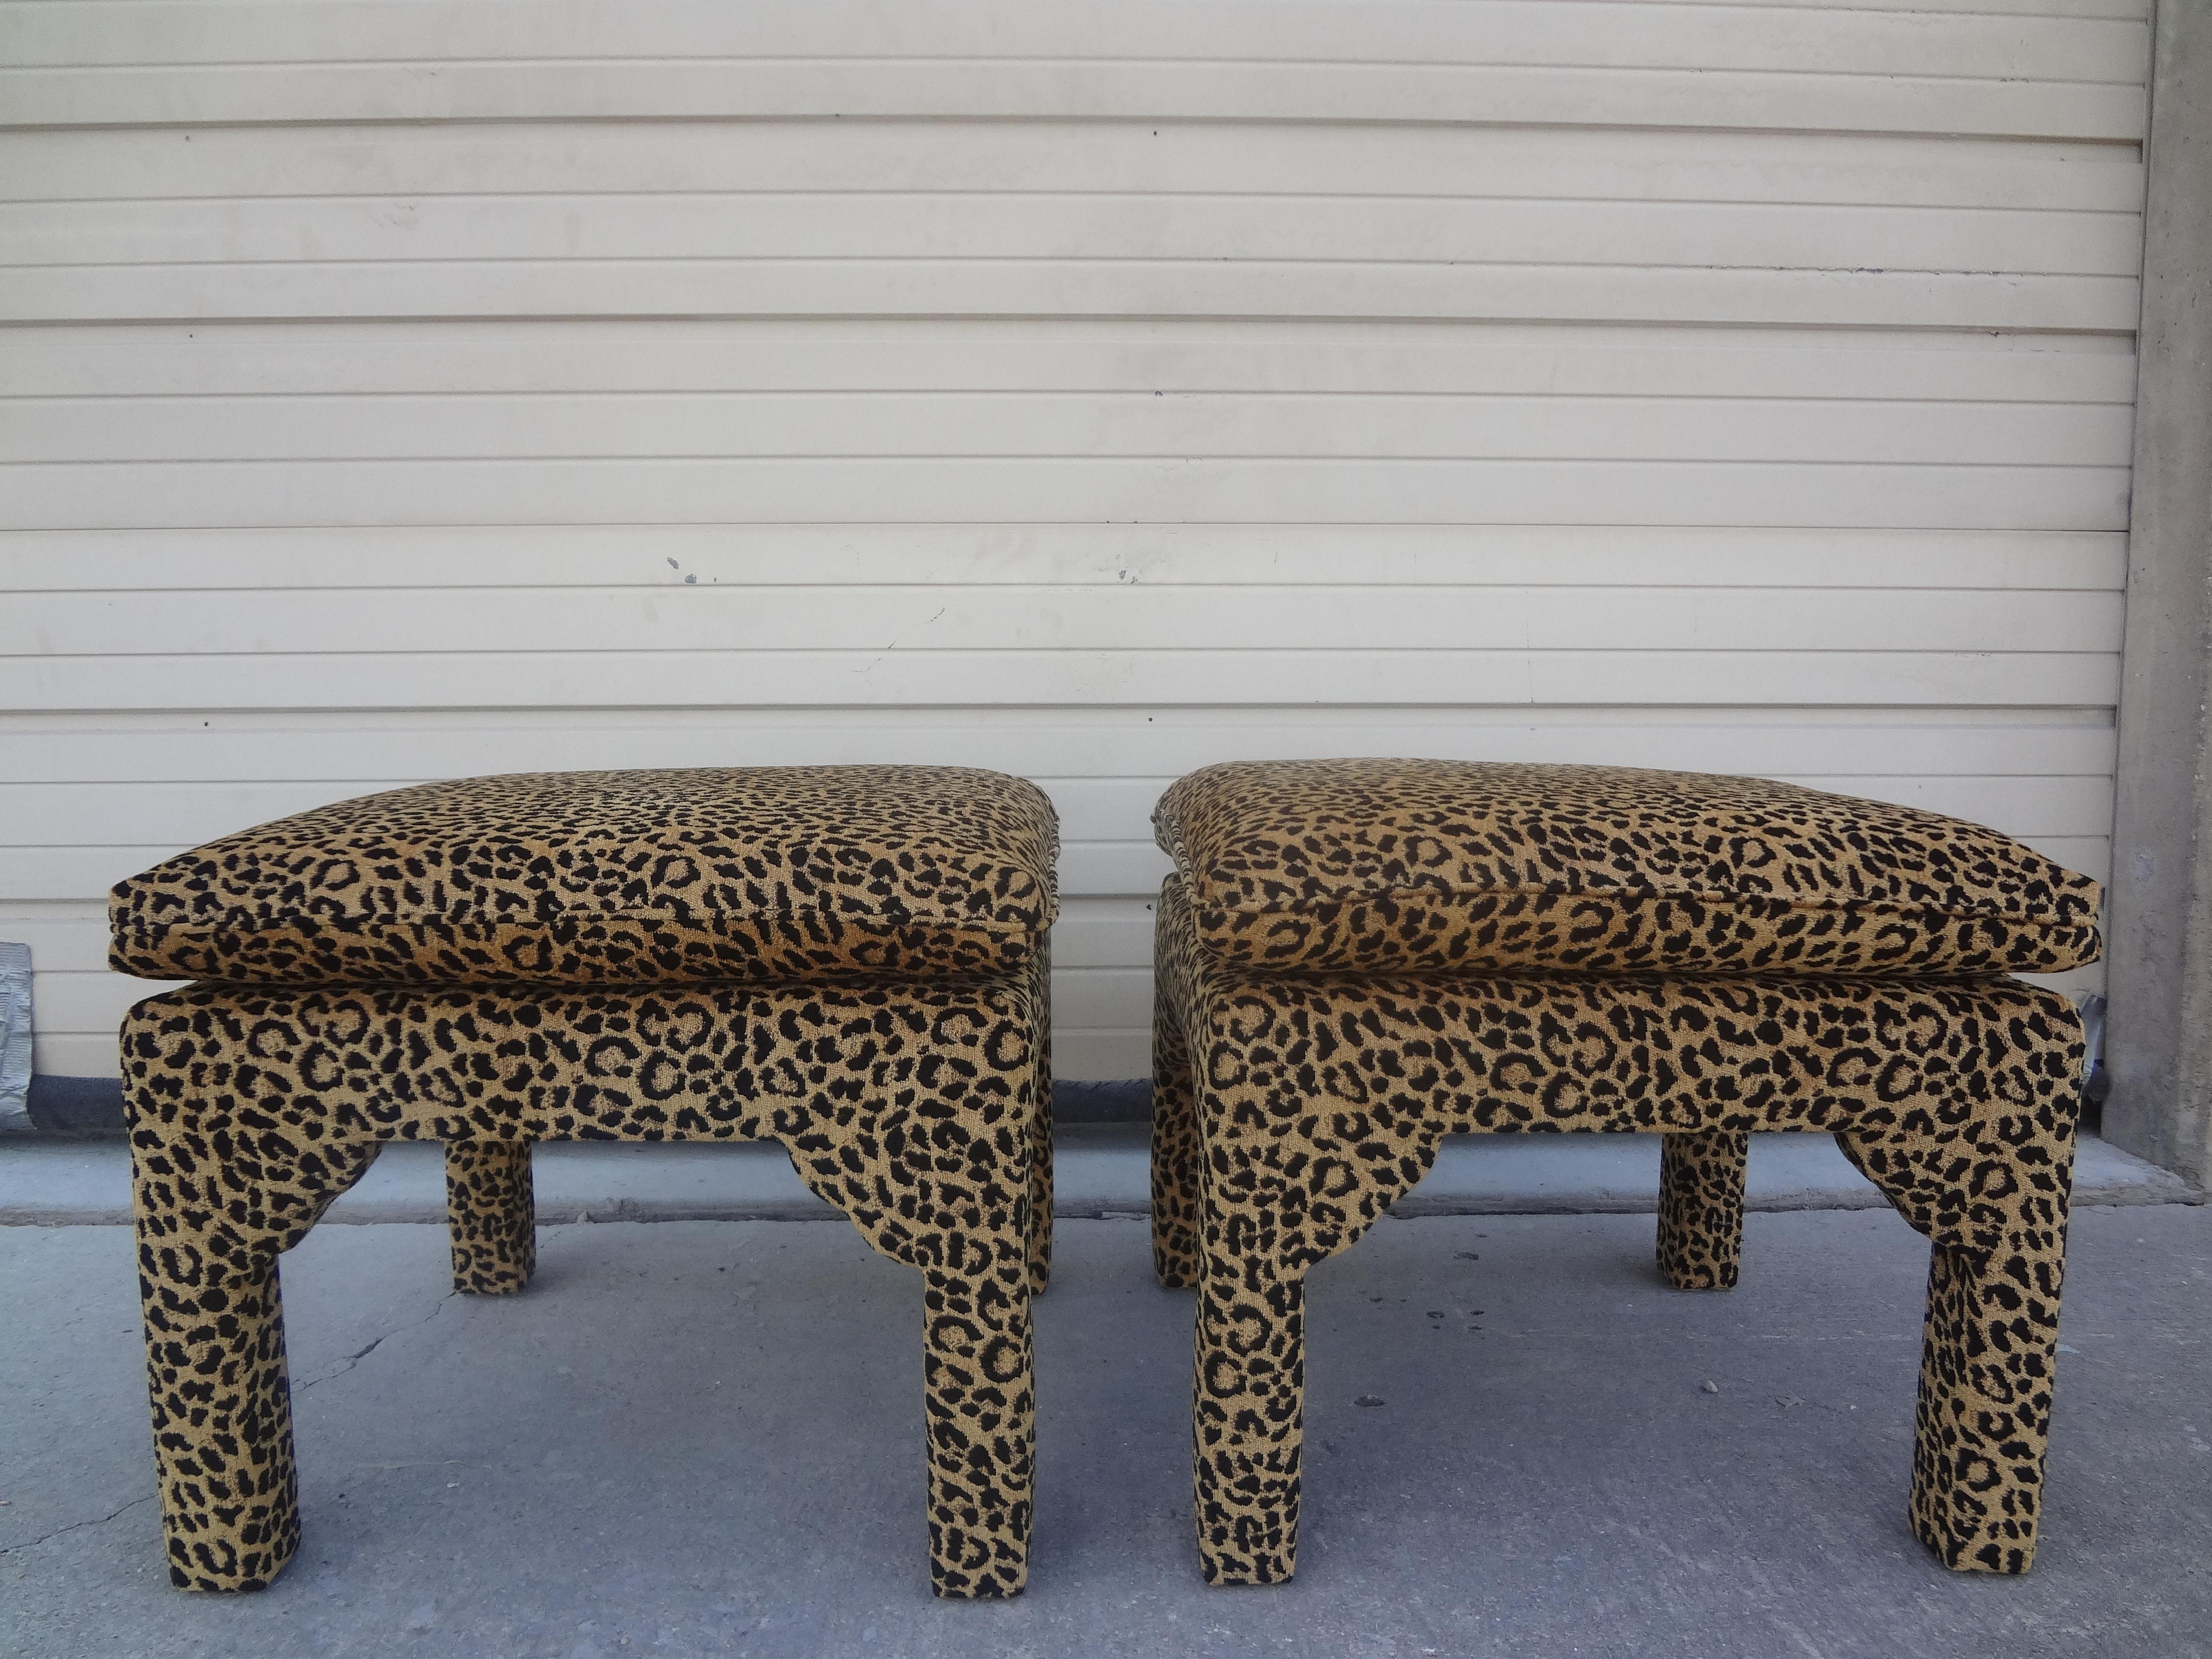 Pair of Billy Baldwin Style Parsons Leopard print ottomans. This stunning pair of Hollywood regency Billy Baldwin style square ottomans, benches, poufs or stools have been professionally upholstered in leopard print chenille. This glamourous pair of